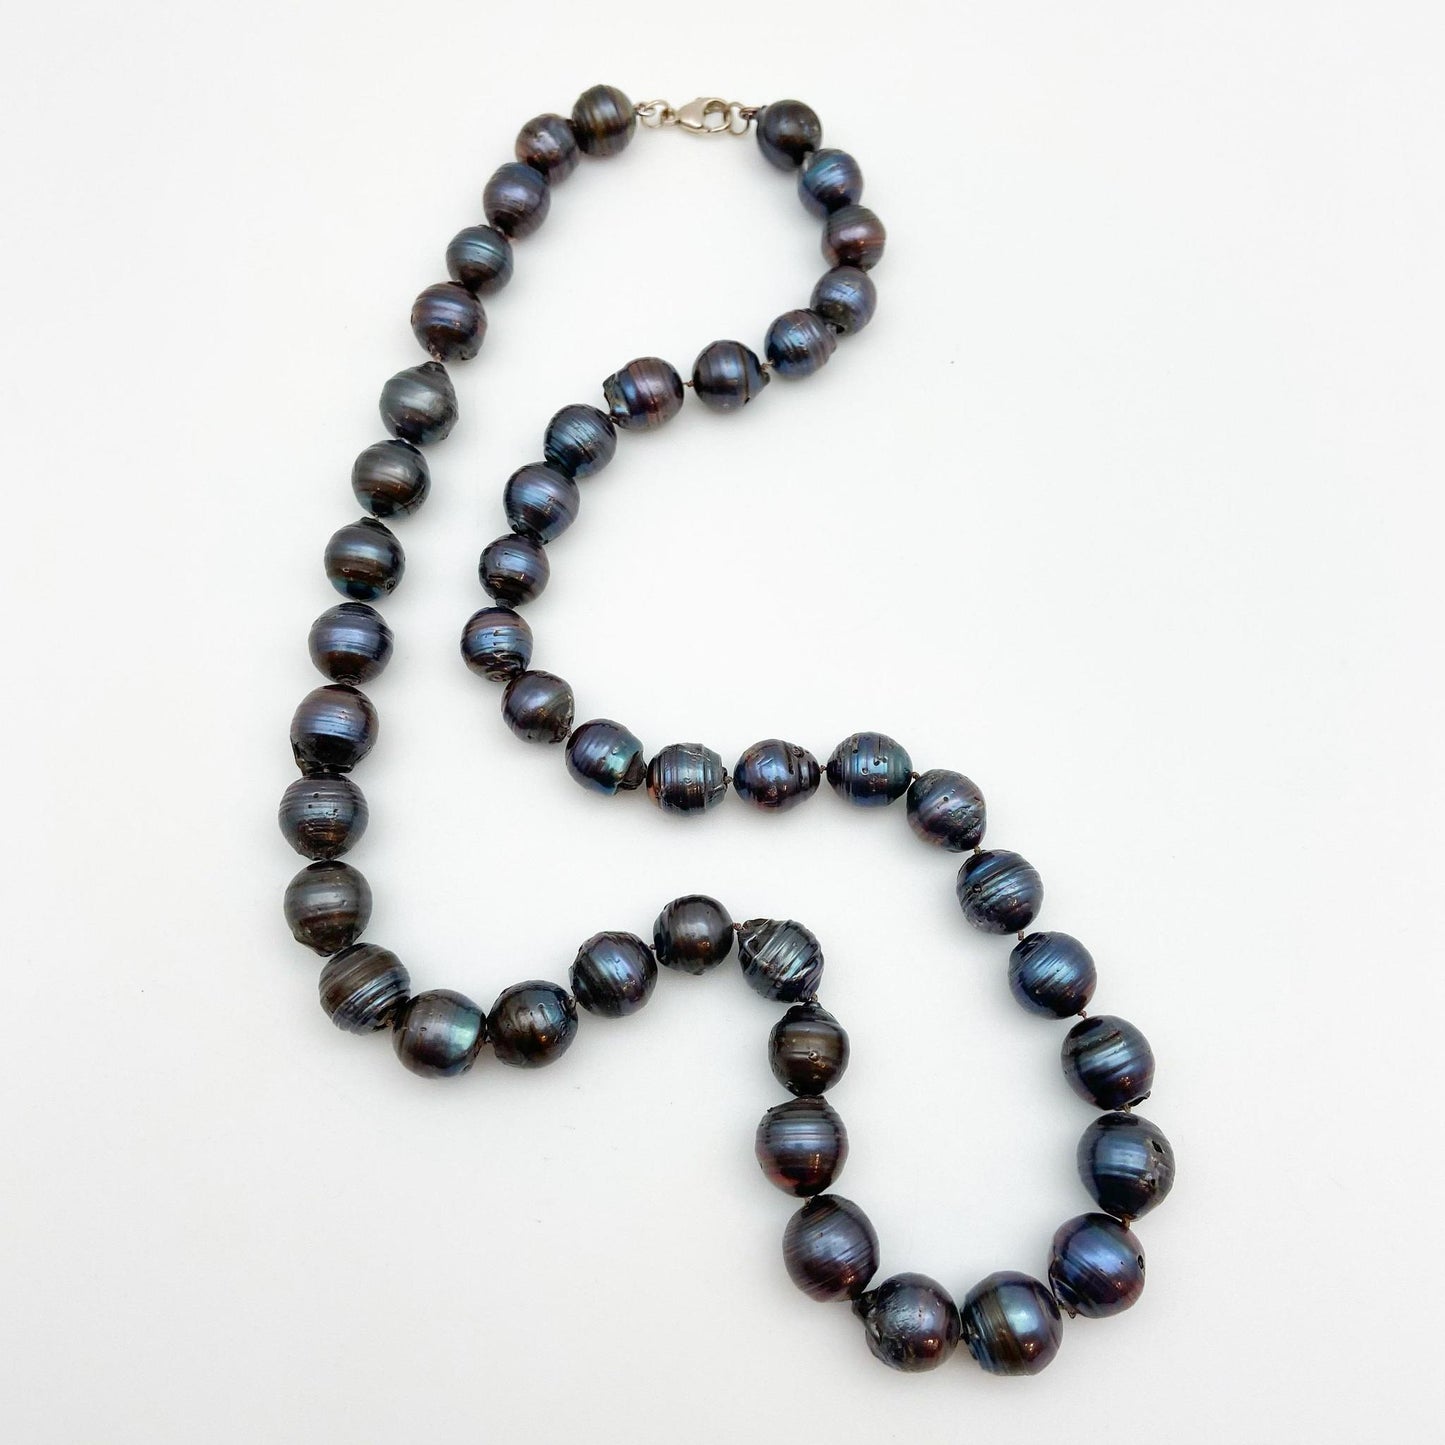 Necklace - Handknotted Dark Pearl - 29"